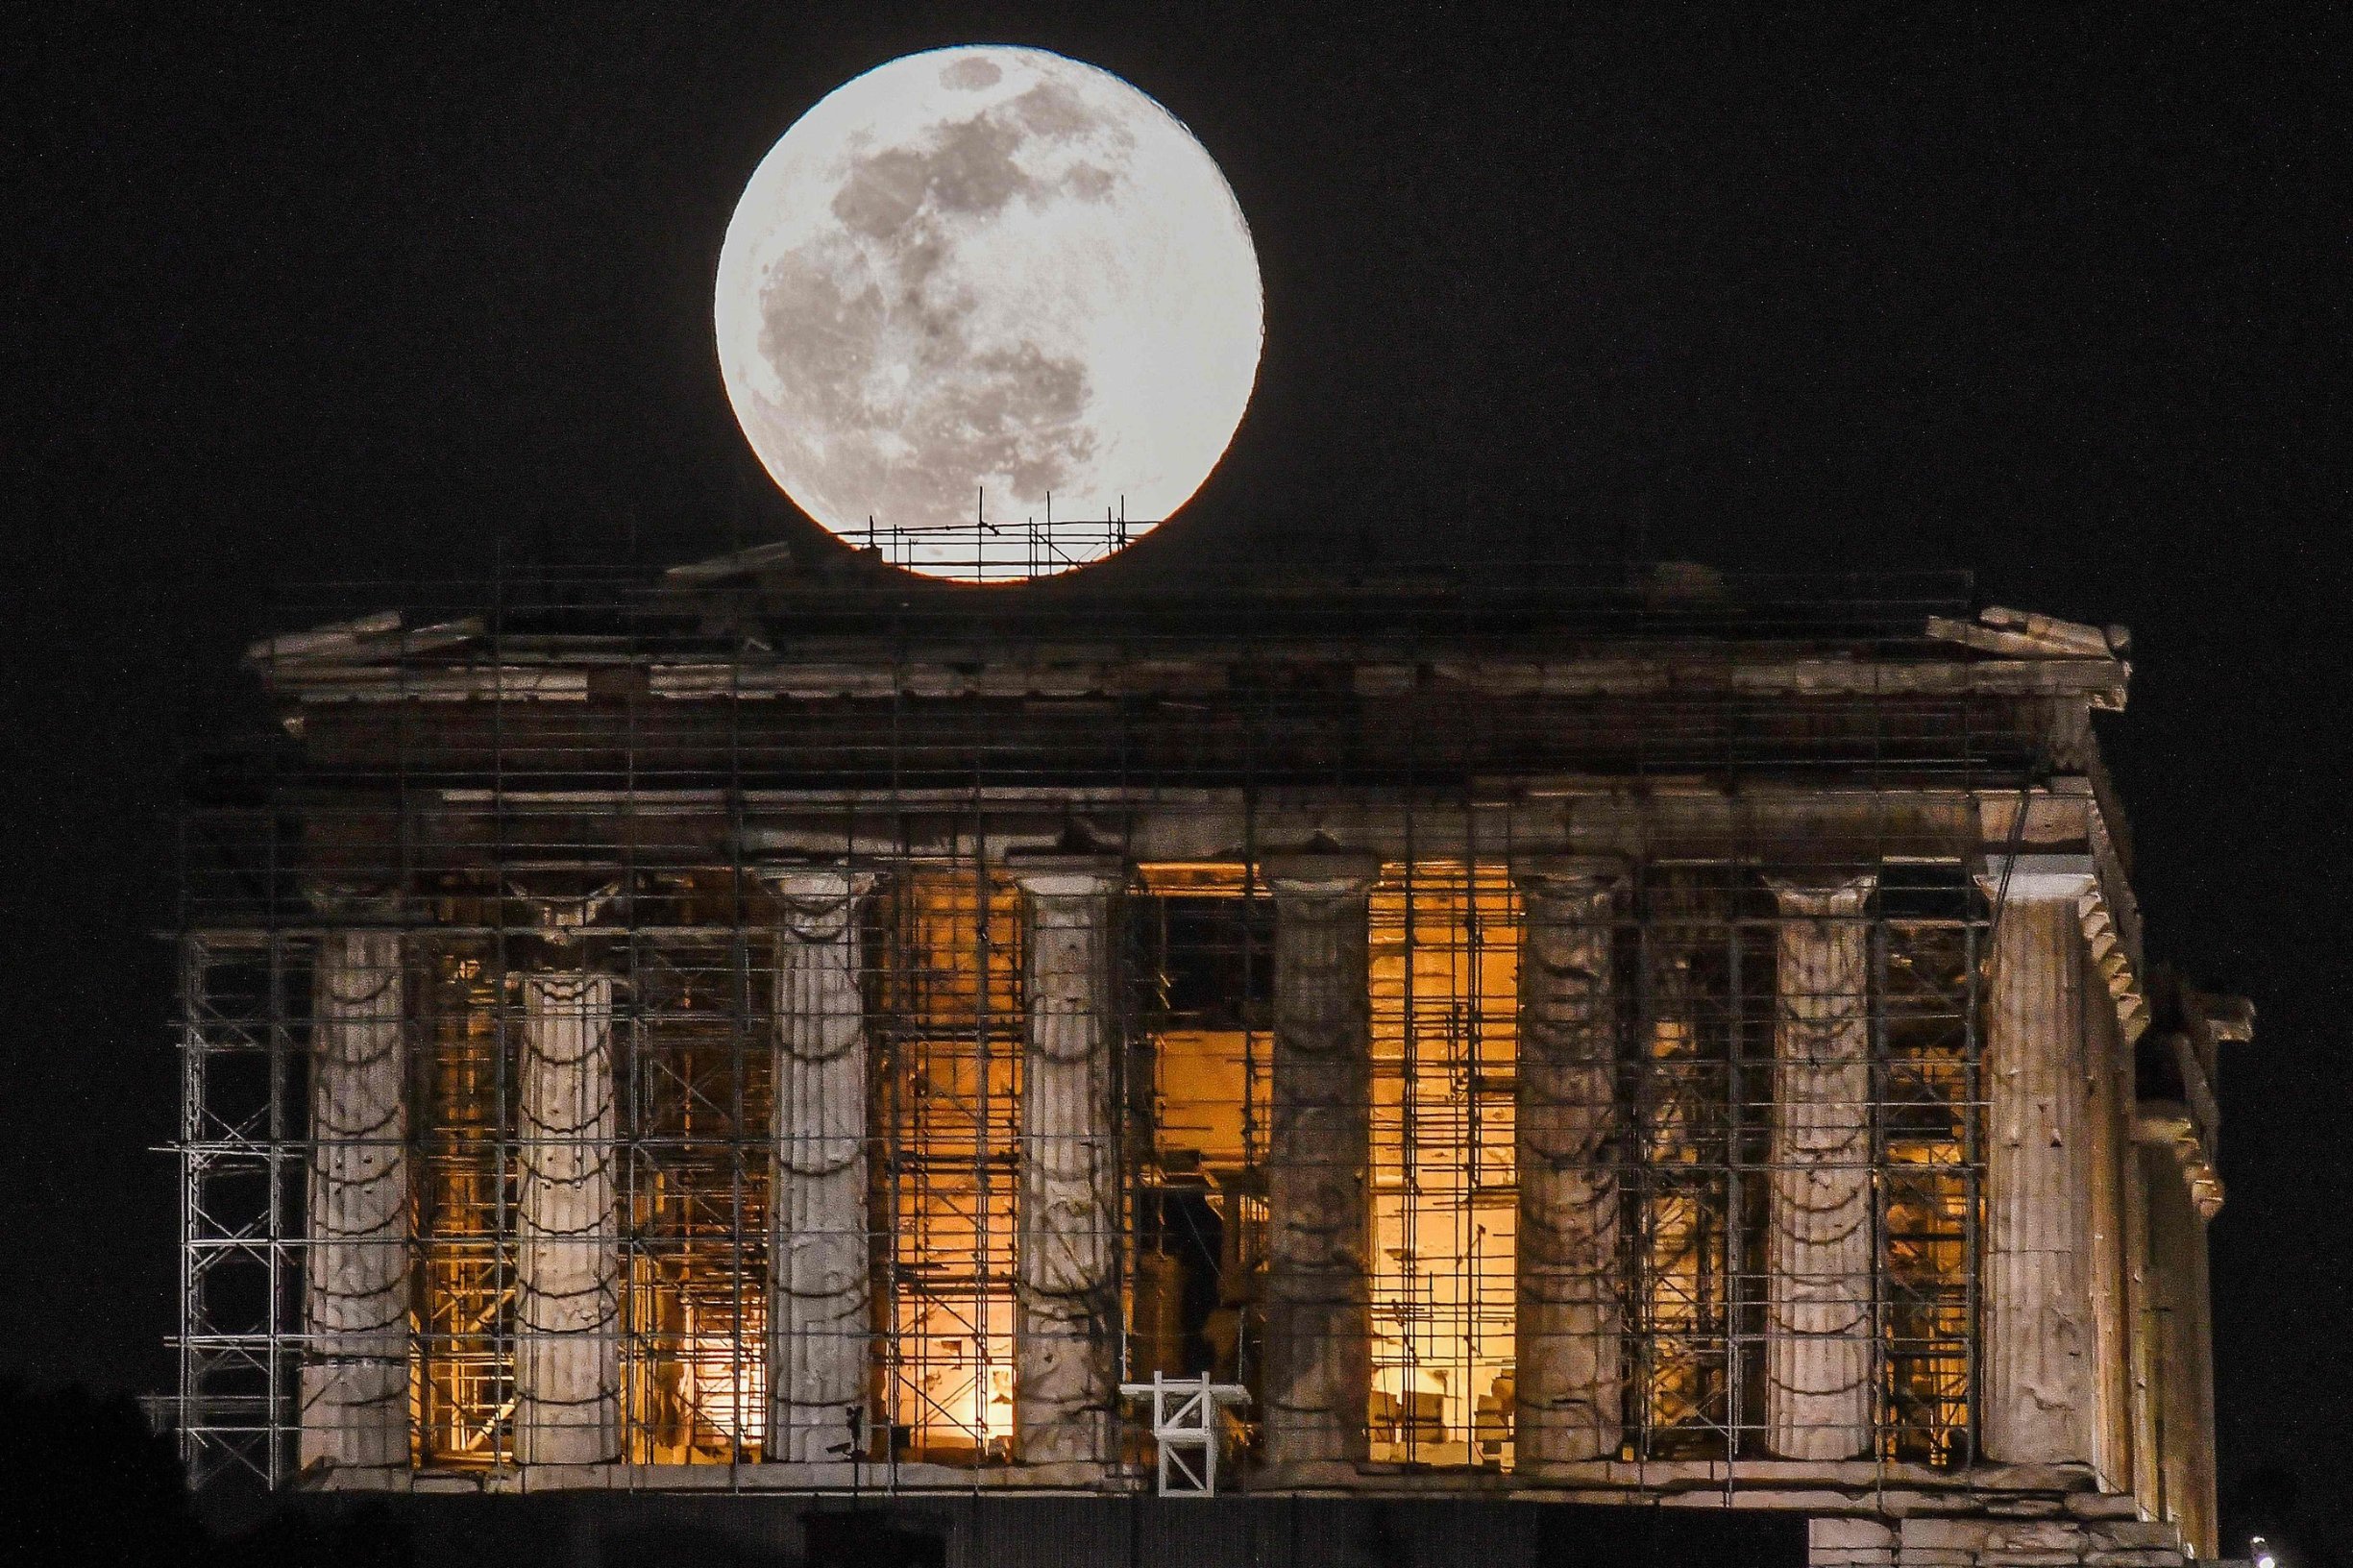 A full moon rises above Greek Parthenon Temple (438 BC), covered by scaffolding, at the Acropolis archaeological site in Athens on February 9, 2020 . (Photo by LOUISA GOULIAMAKI / AFP)